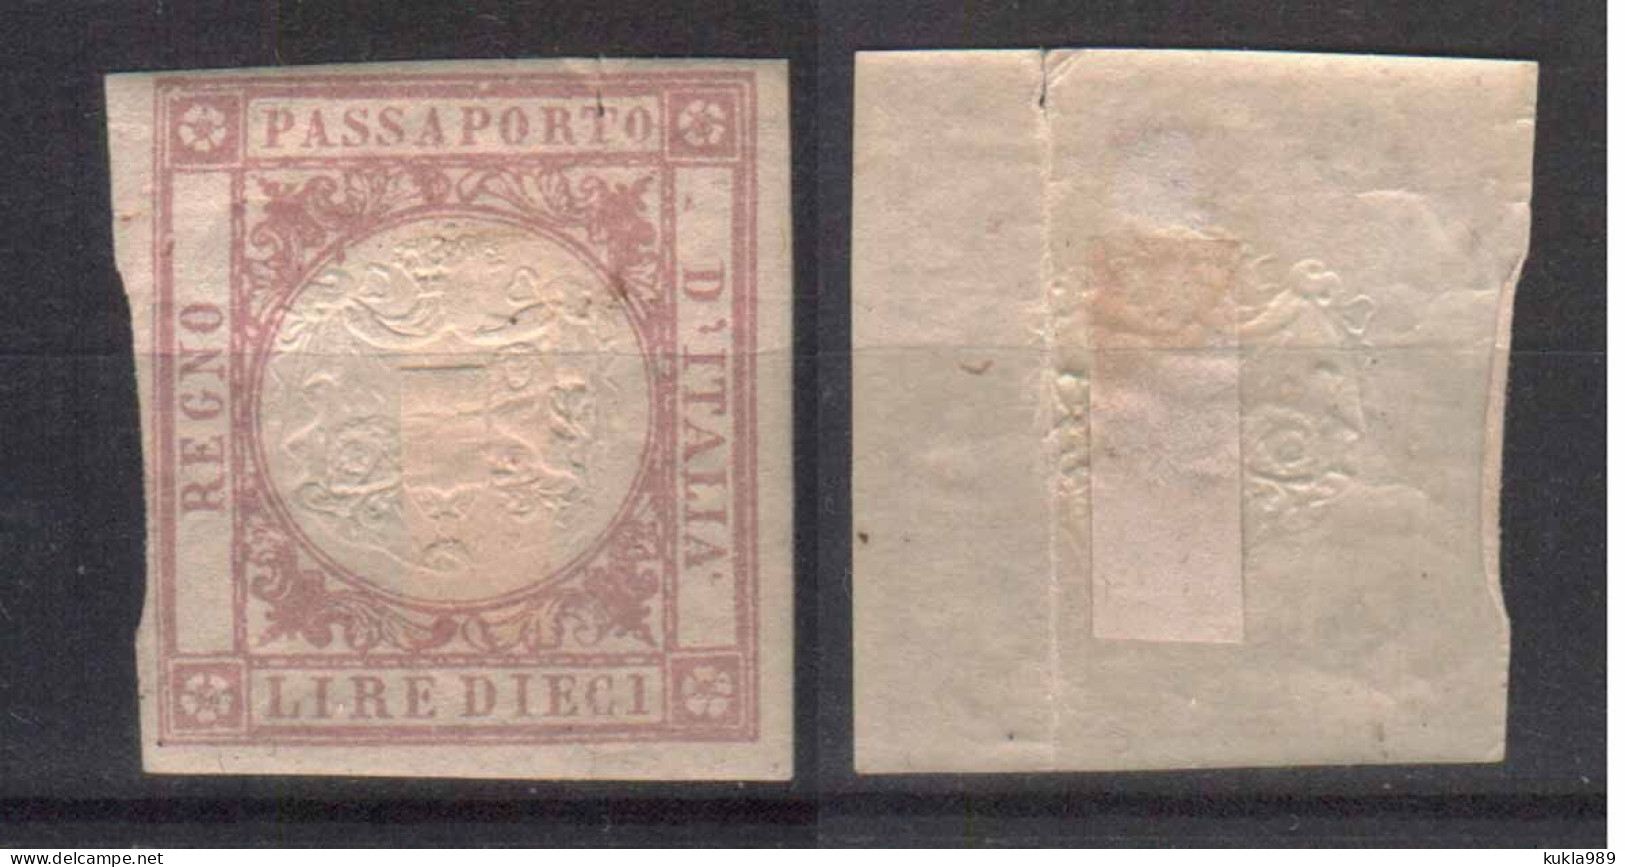 KINGDOM ITALY   FISCAL REVENUE TAX PASSPORT  STAMP  C. 1860s, MH - Fiscales